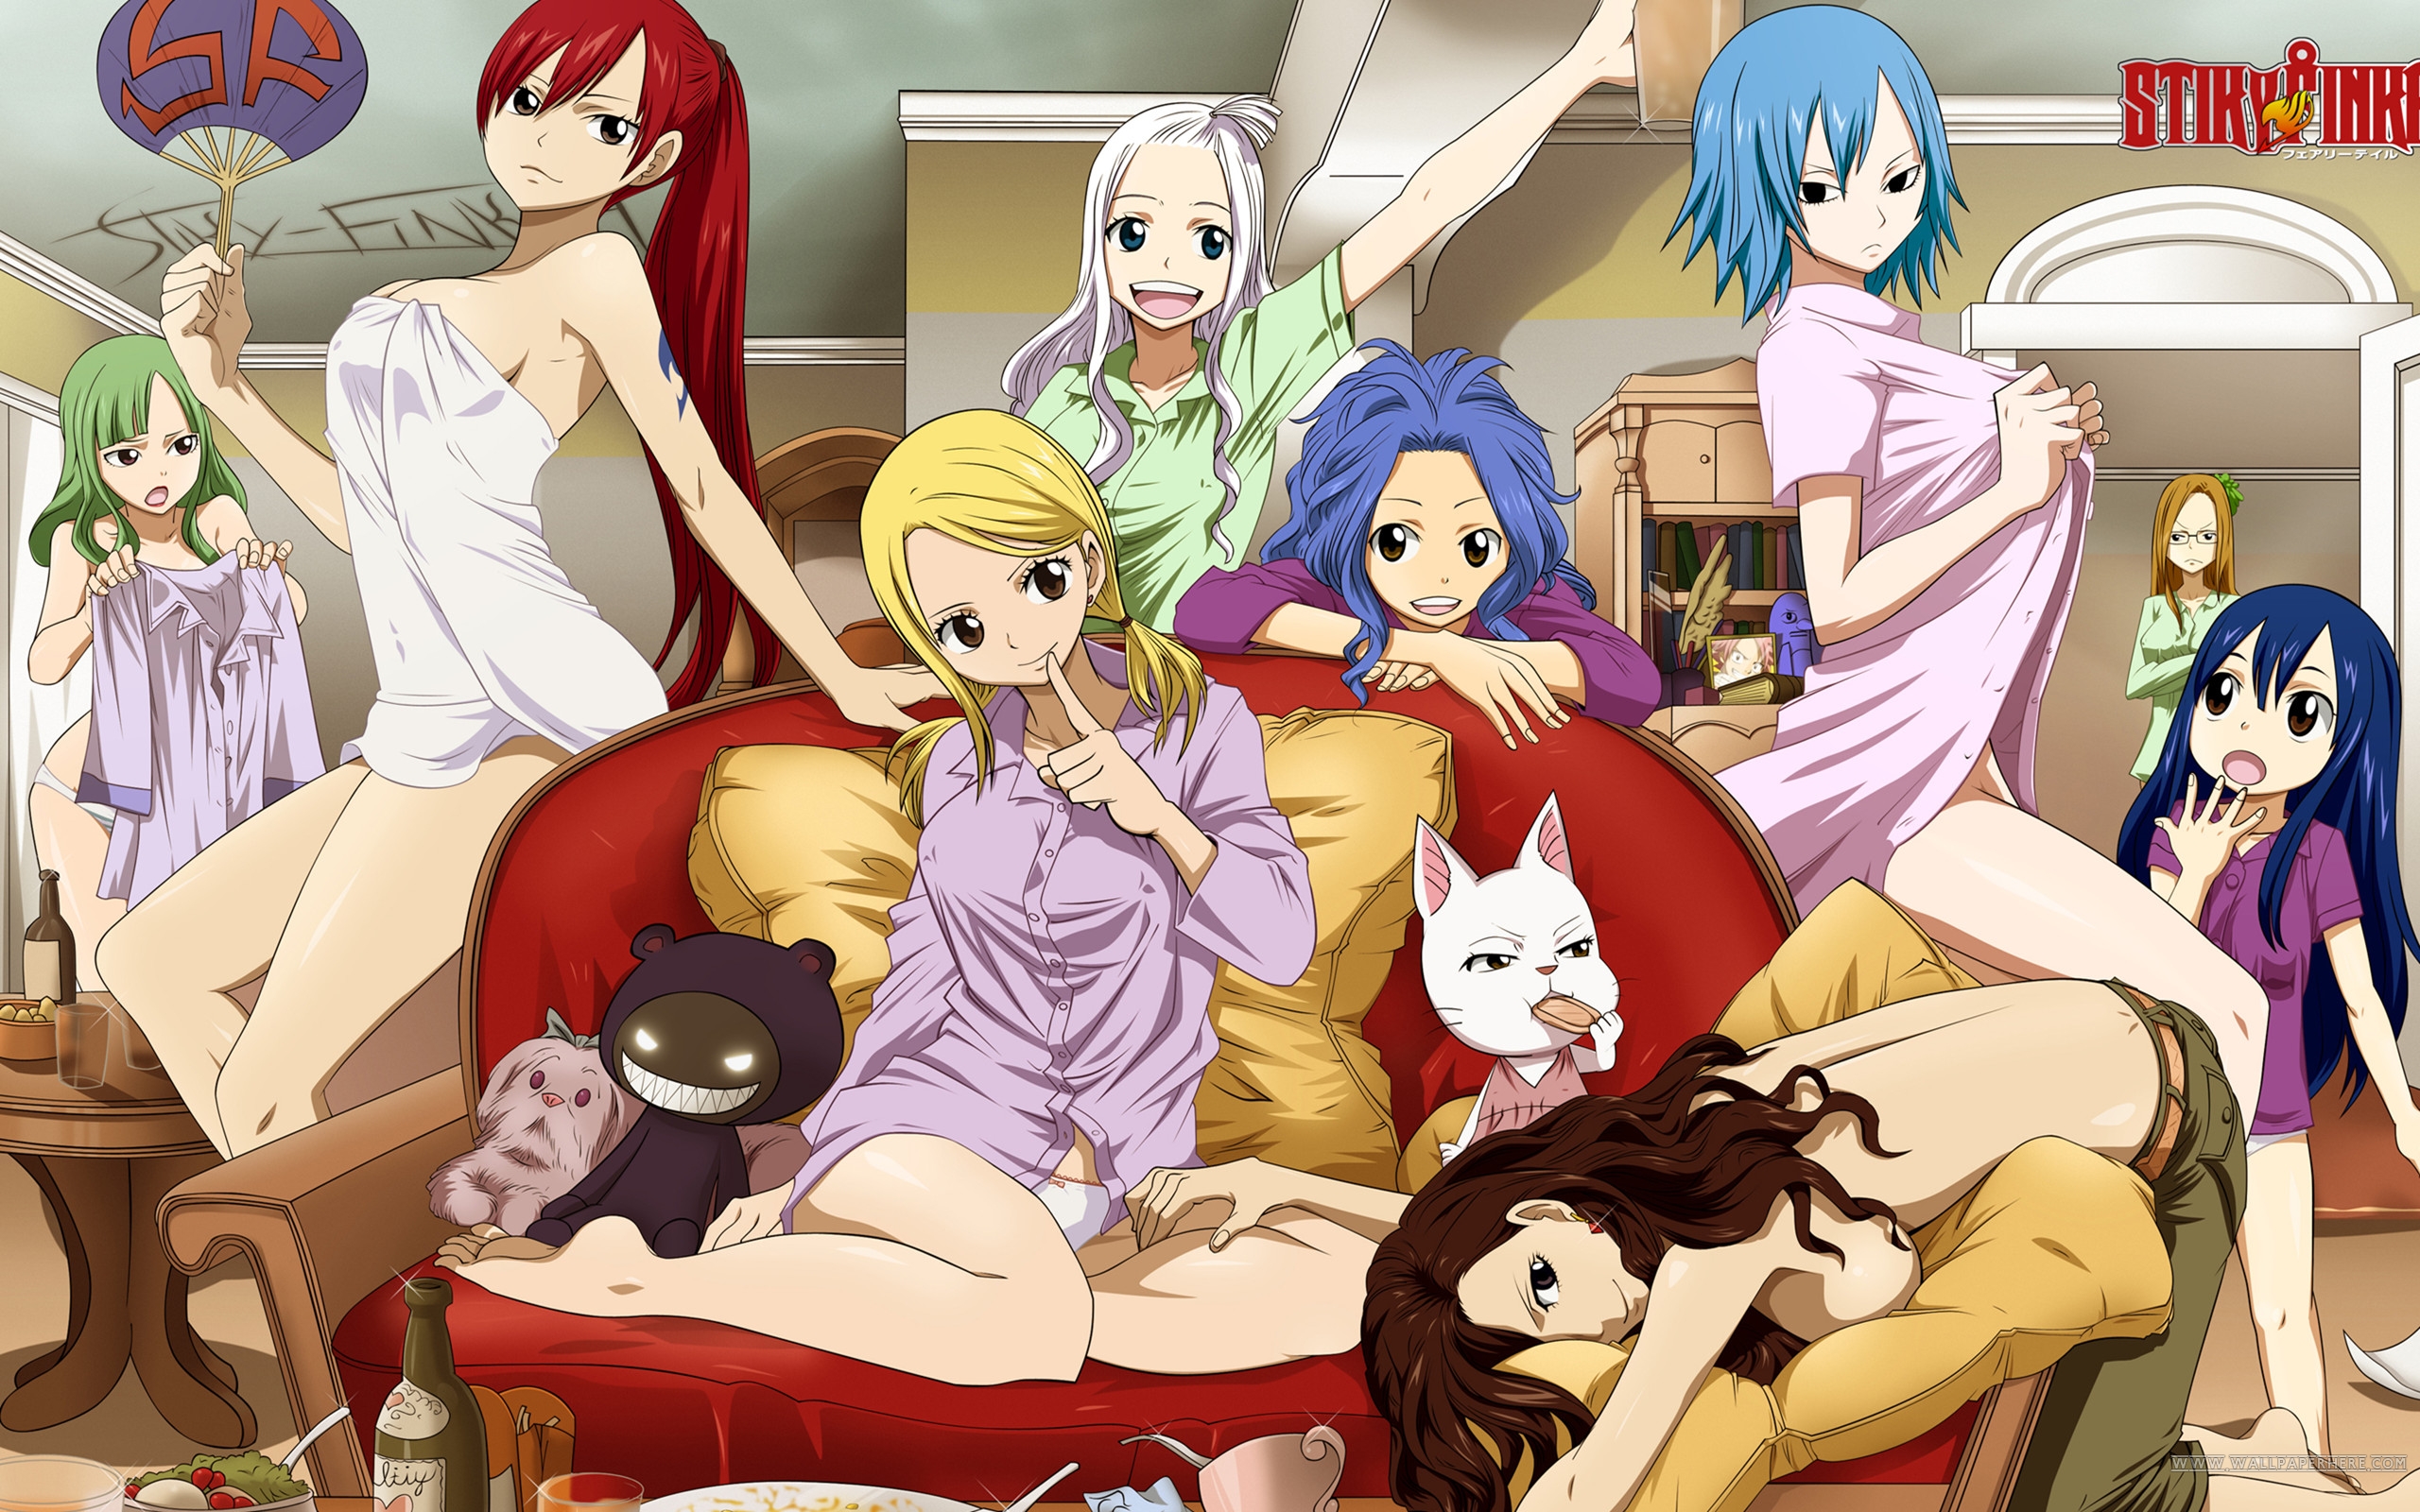 Download Fairy Tail Wallpaper High Resolution Full HD pictures in high 2560x1600